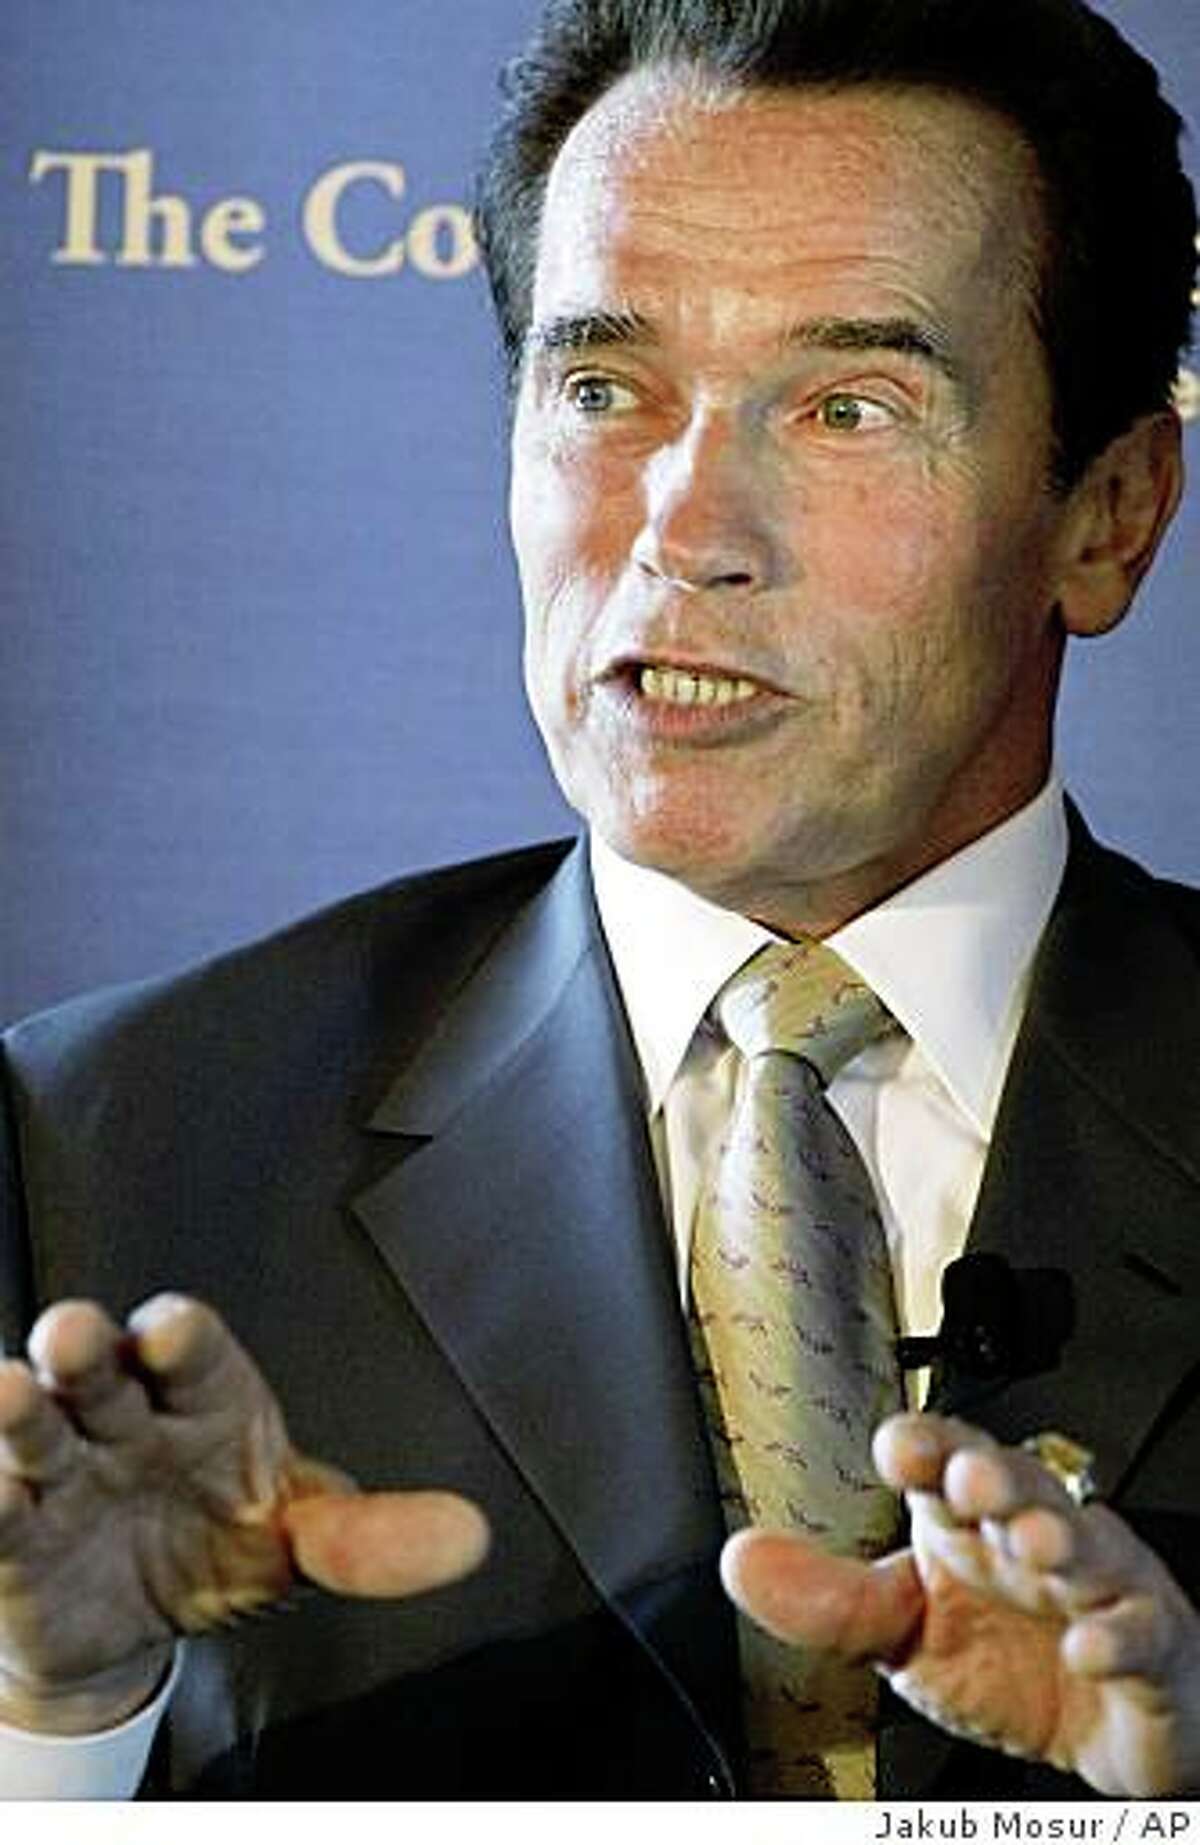 California Governor Arnold Schwarzenegger speaks on the state's plan to transition to a clean energy economy at the Commonwealth Club in San Francisco on Friday, Sept. 26, 2008. Governor Schwarzenegger appears on the second anniversary of his signing of the Global Warming Solutions Act. (AP Photo/Jakub Mosur)